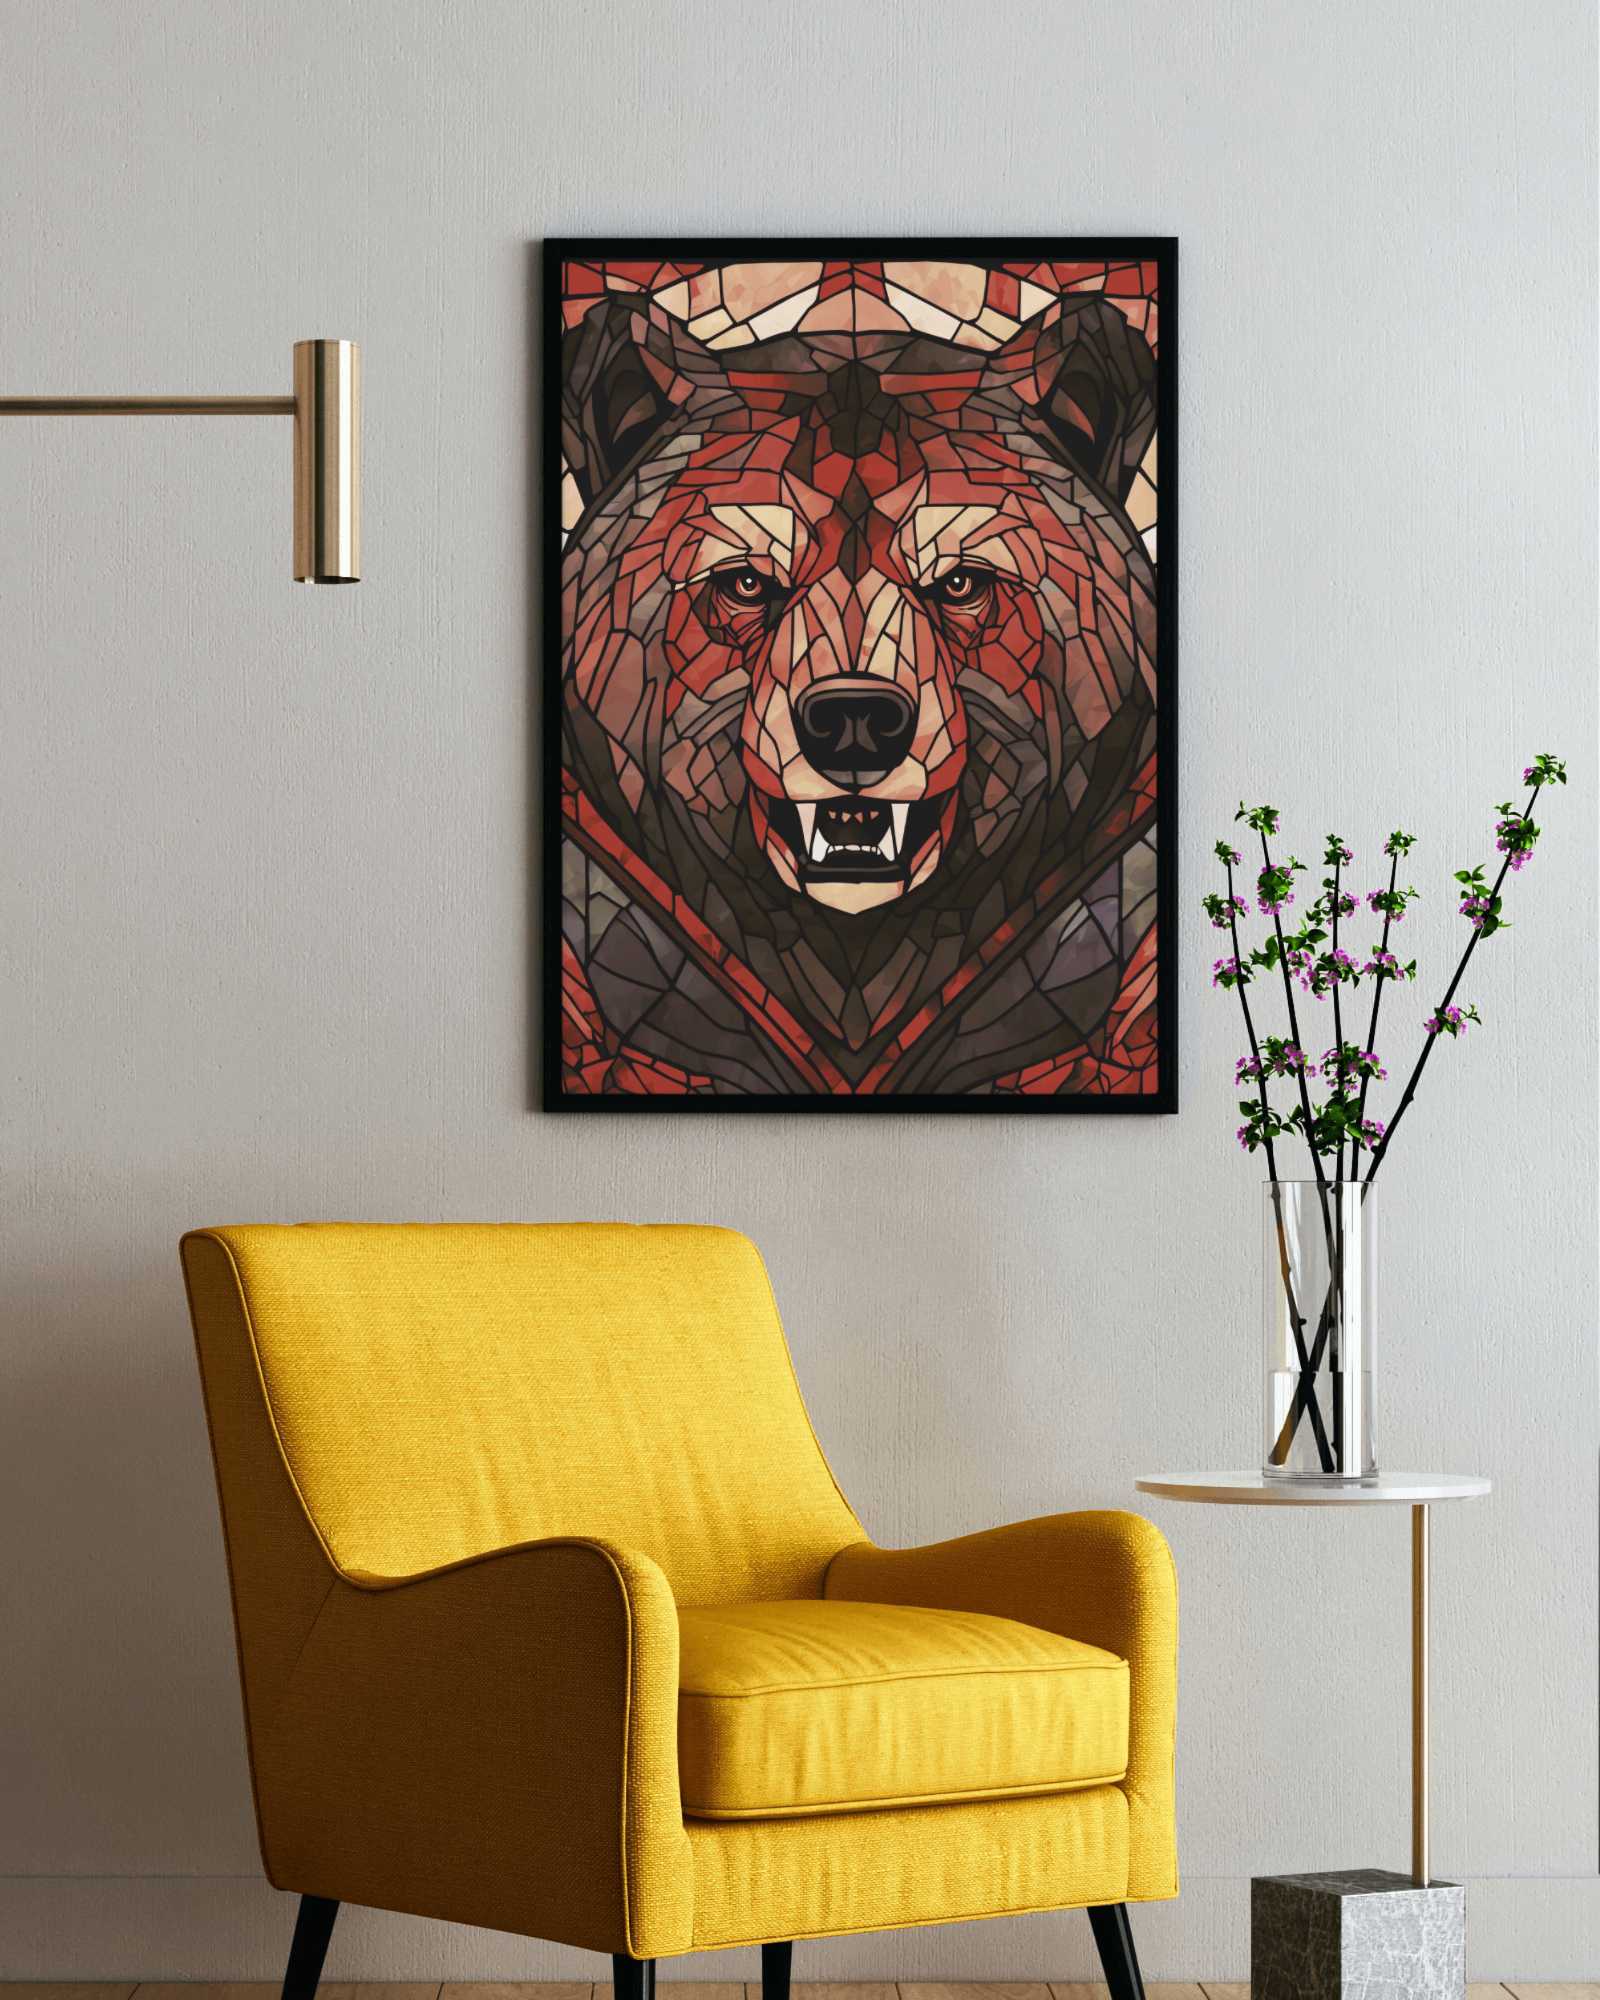 Crimson grizzly - Poster - Ever colorful